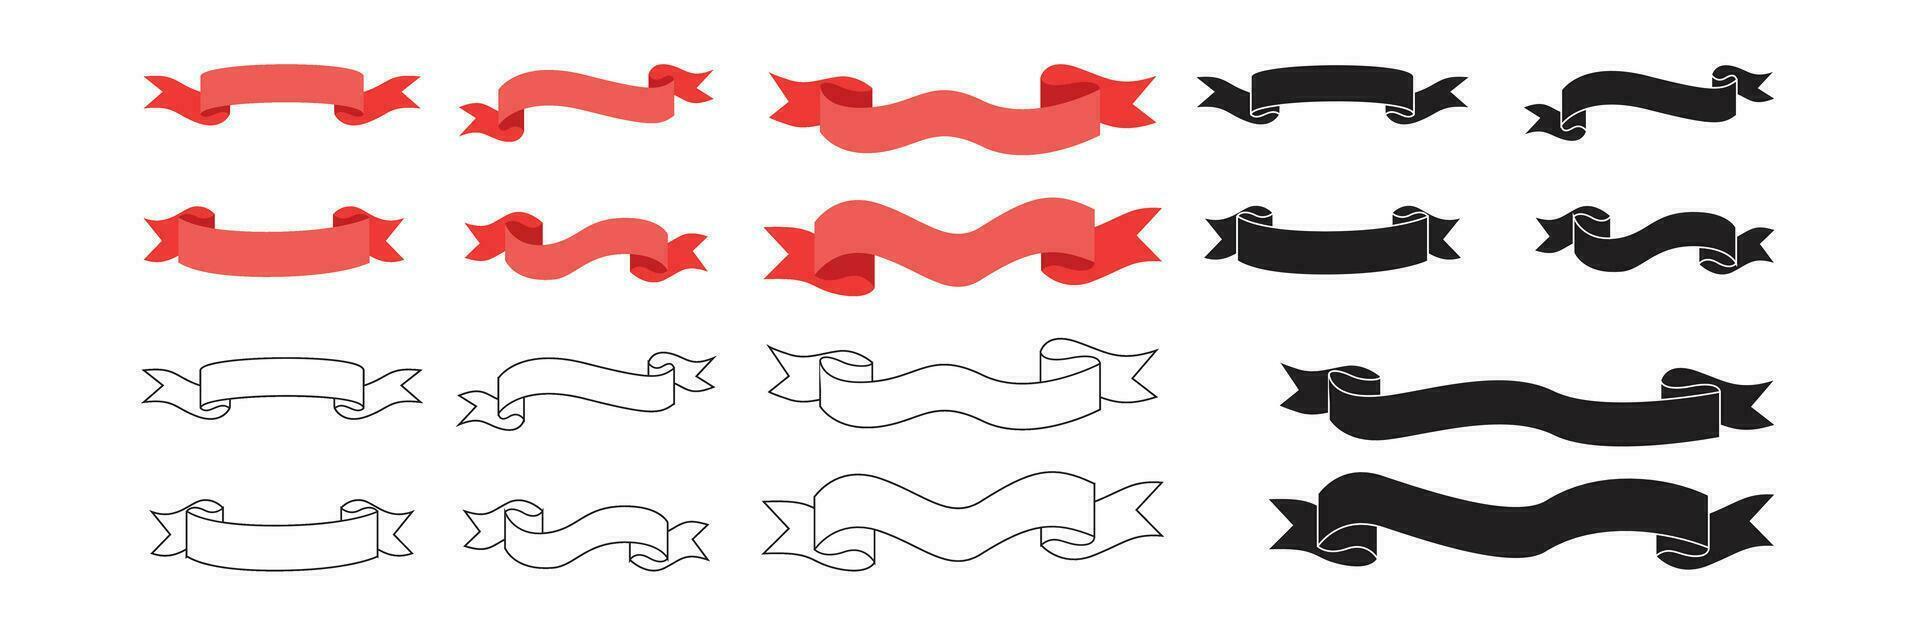 blank ribbon and banner collection set isolated vector